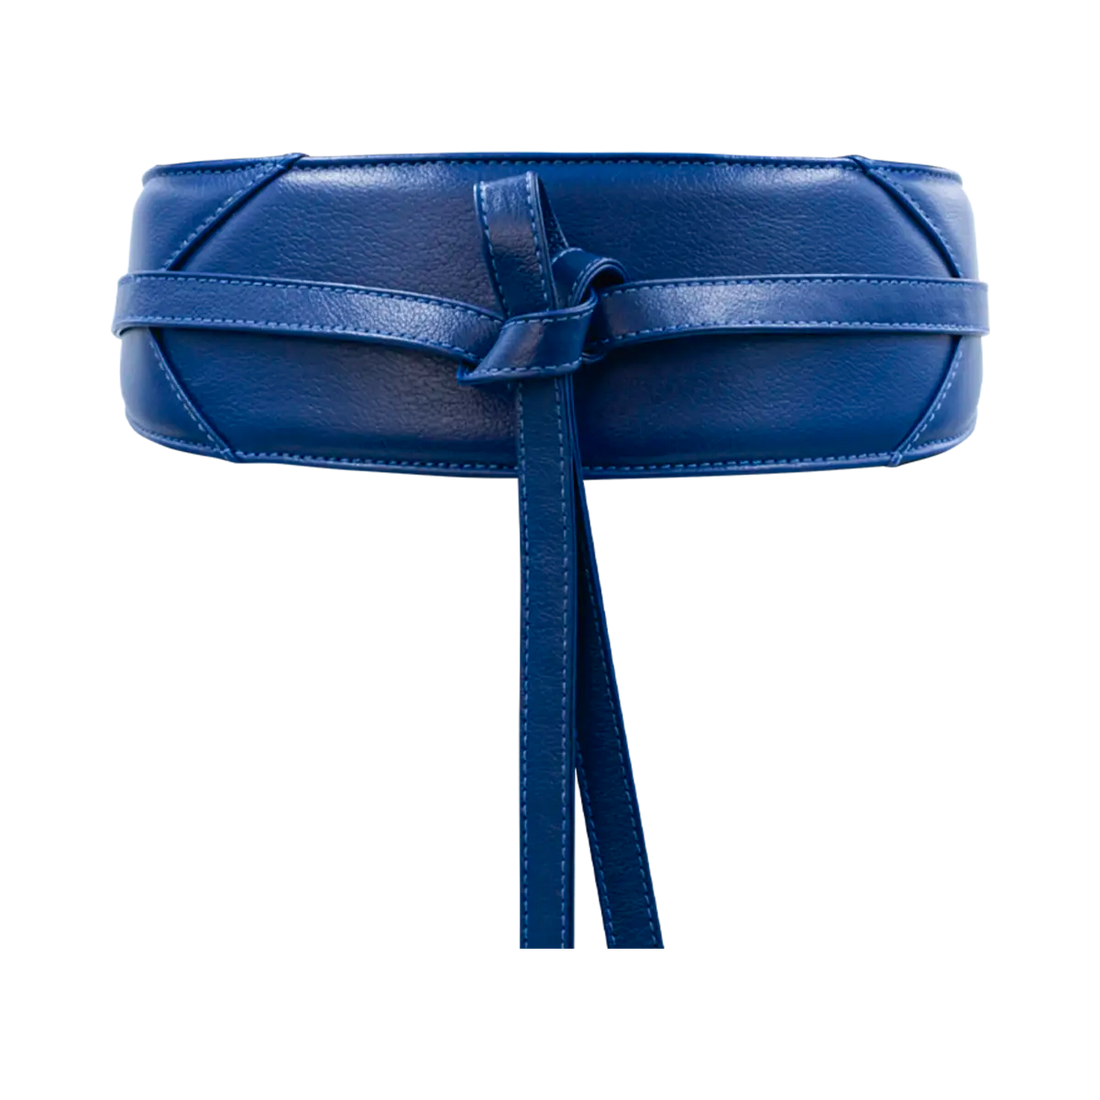 large blue wrap-around belt for women. Available in San Diego, CA.